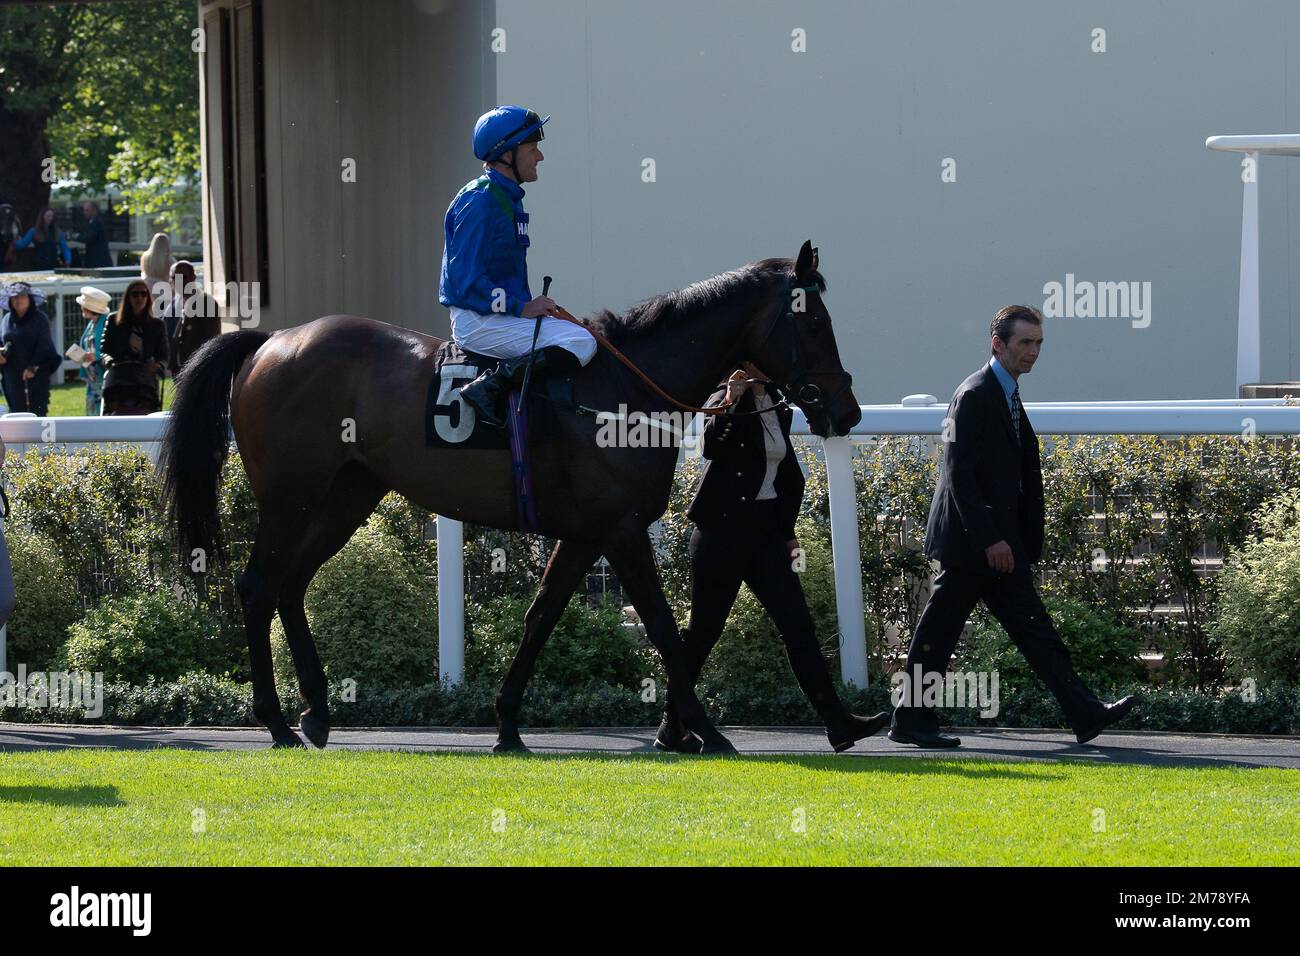 Ascot, Berkshire, UK. 7th May, 2022. Horse Kalma ridden by jockey Tom Queally returns to the Parade Rin after racing in the Dare to Dream Racing on Facebook Fillies Handicap Stakes.Credit: Maureen McLean/Alamy Stock Photo